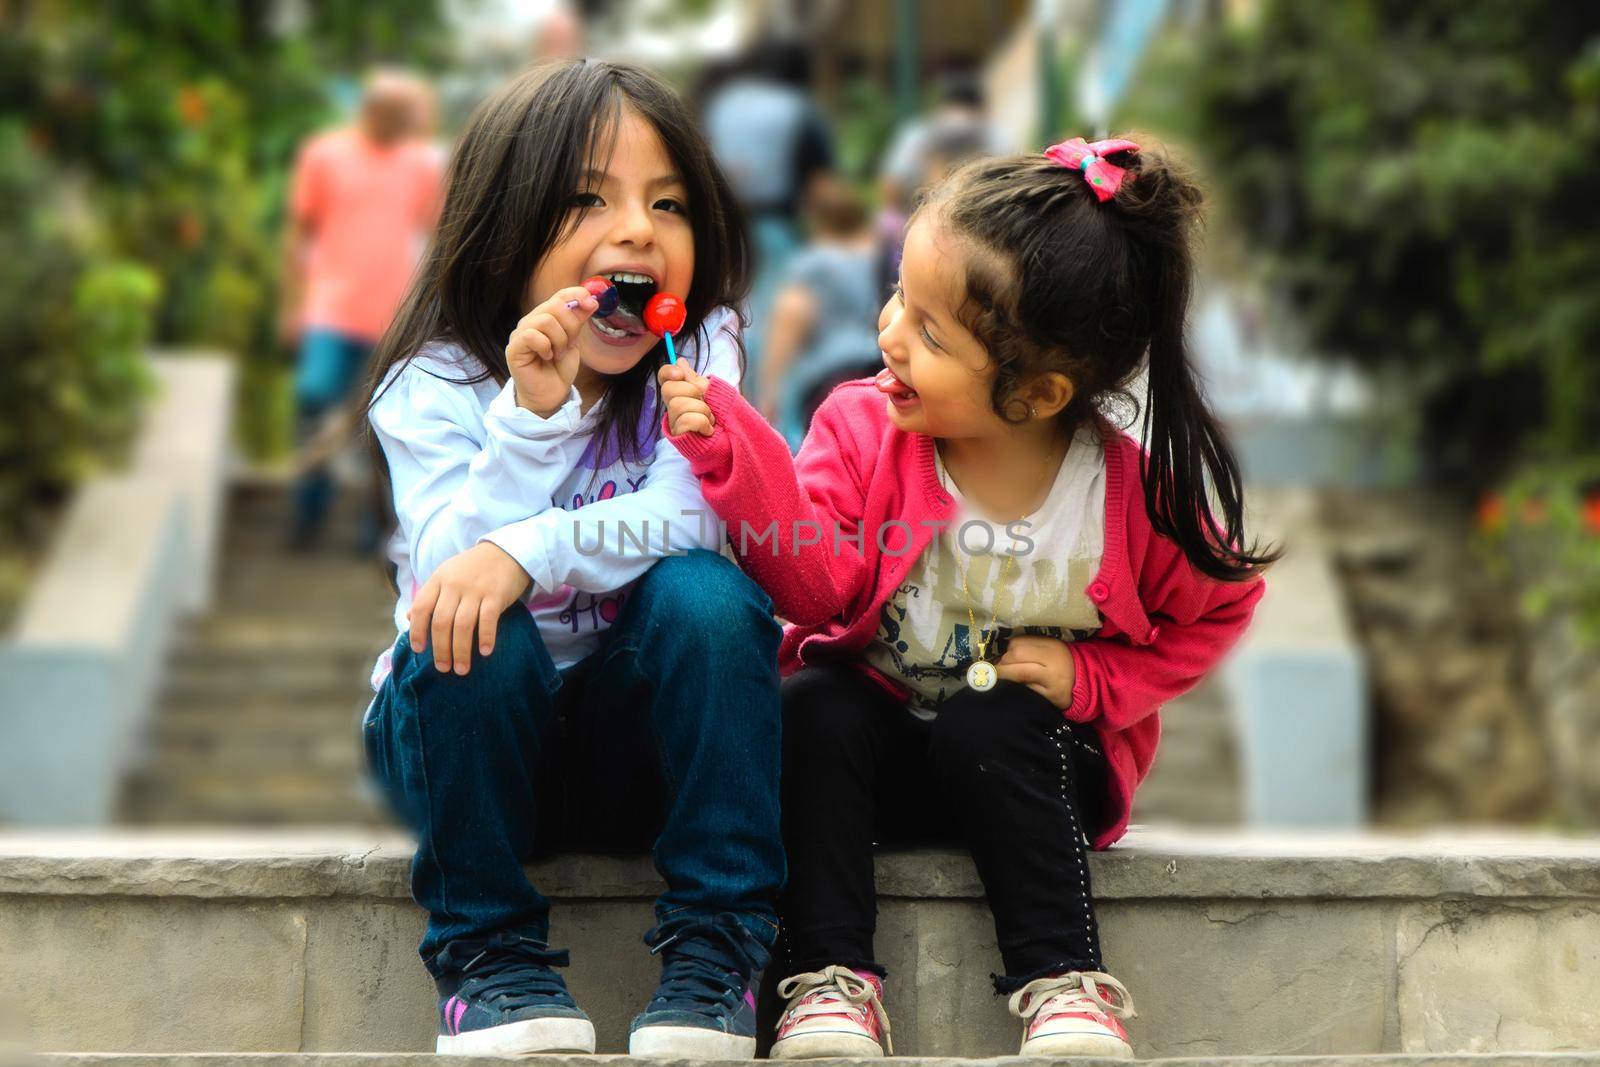 Two girls sitting and eating a lollipop in the park, summer outdoor portrait. best friends